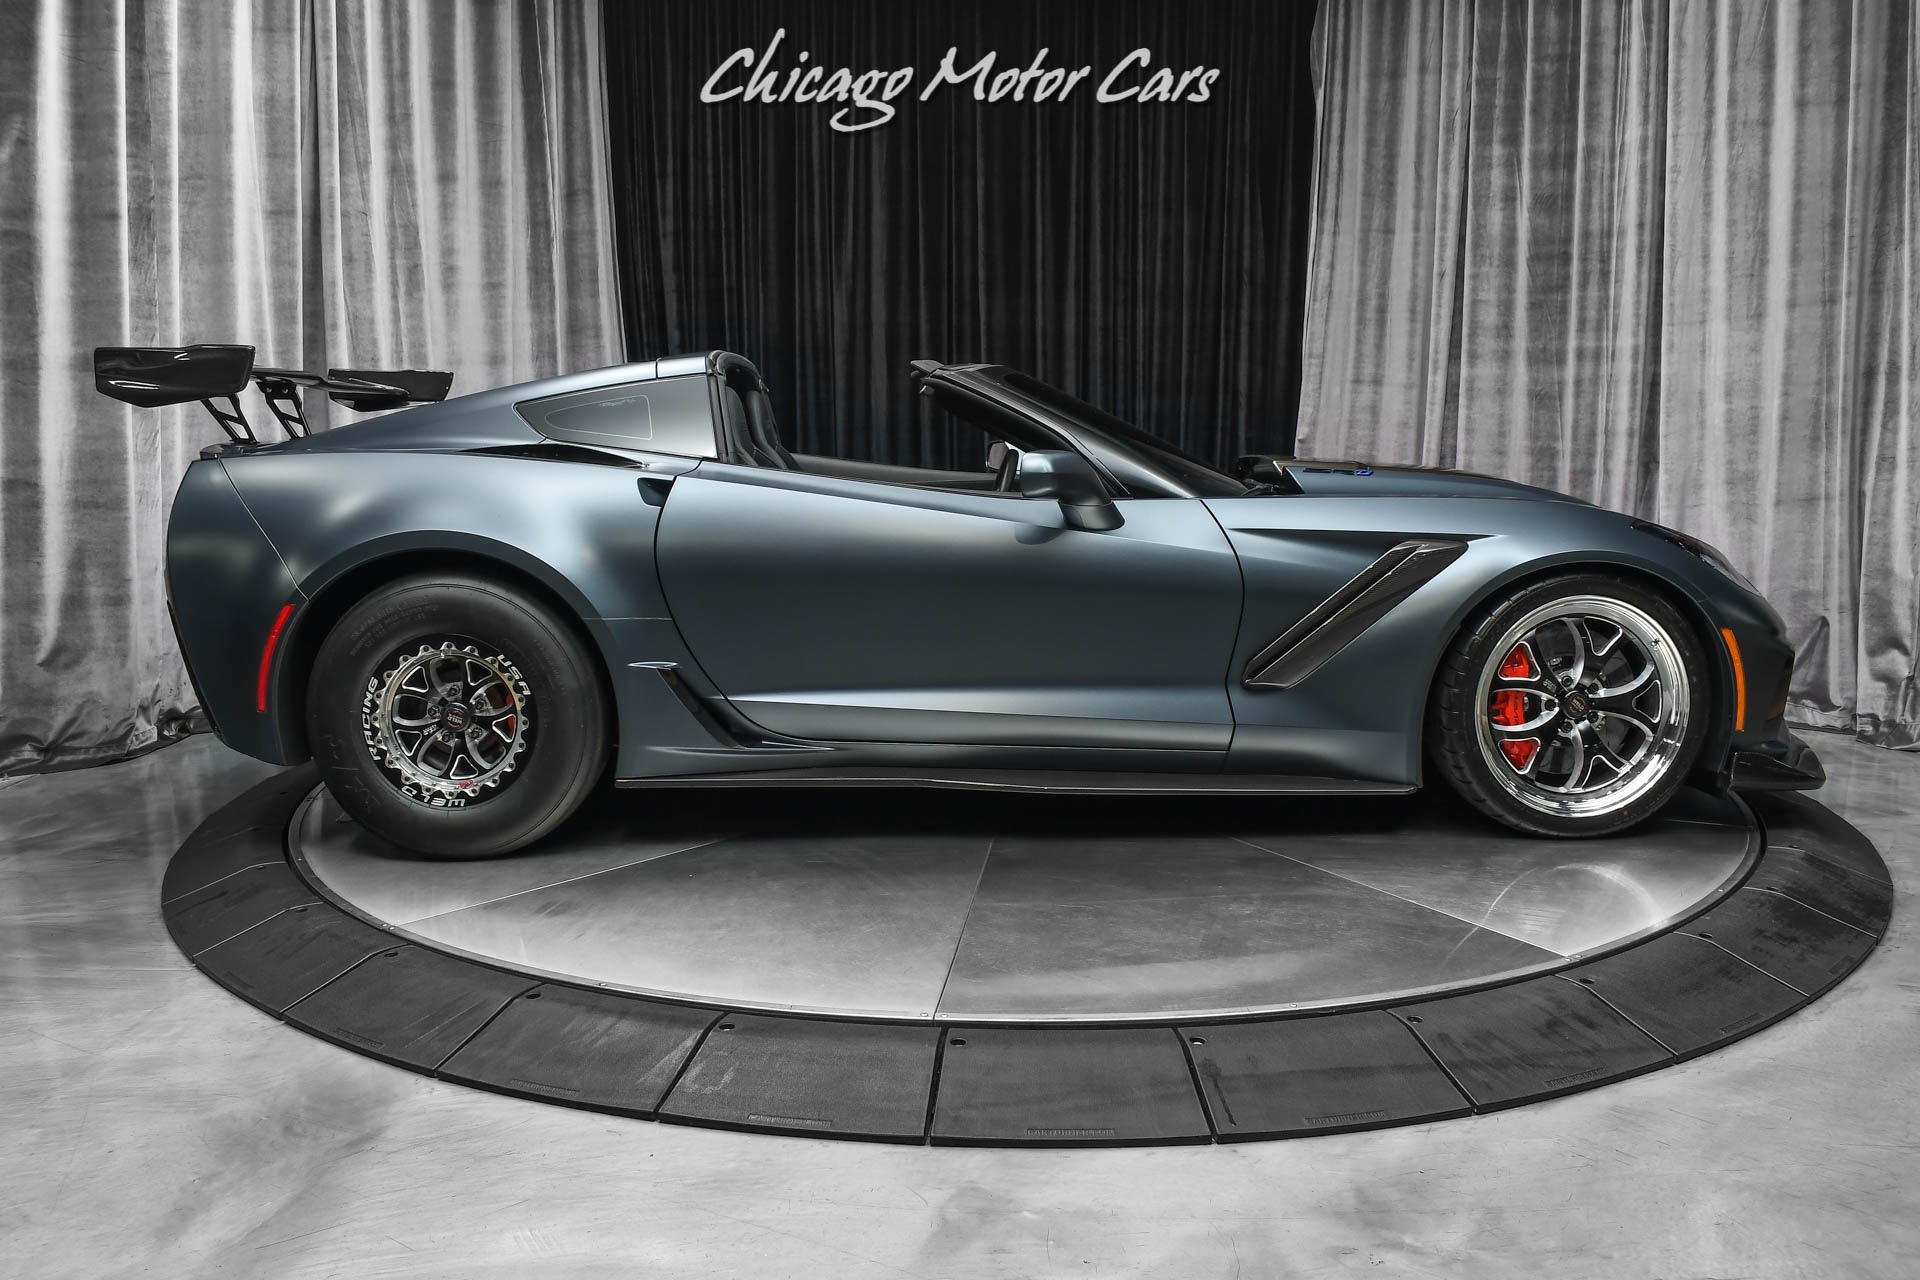 Used-2019-Chevrolet-Corvette-ZR1-Coupe-1250HP-LOW-MILES-TASTEFULLY-UPGRADED